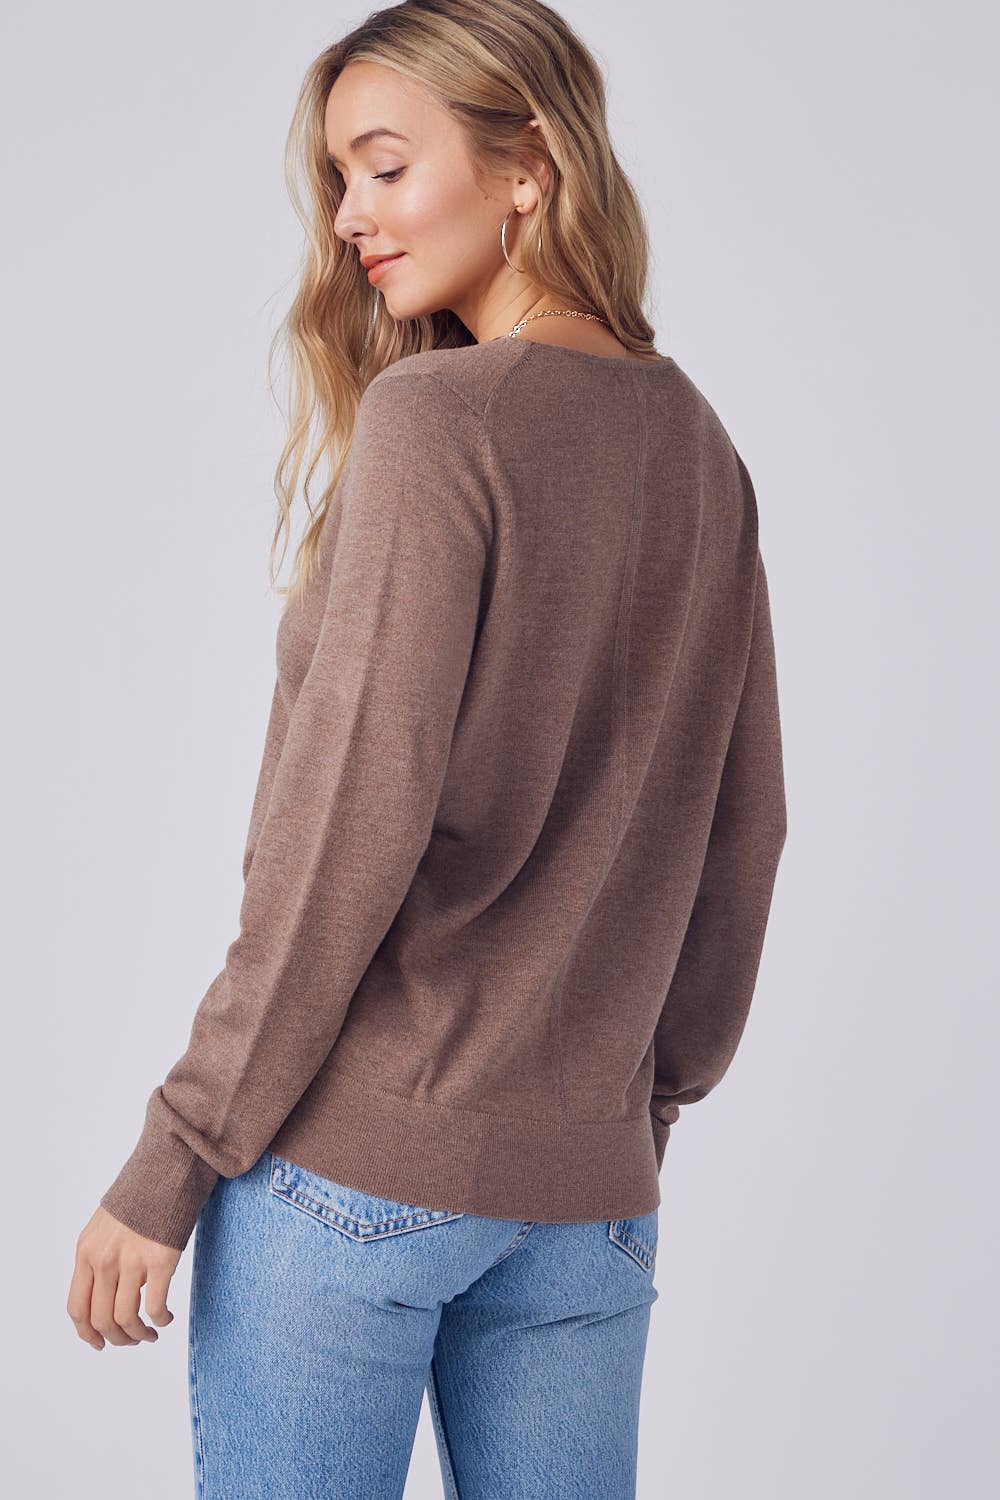 Classic VNeck Pullover in Coffee